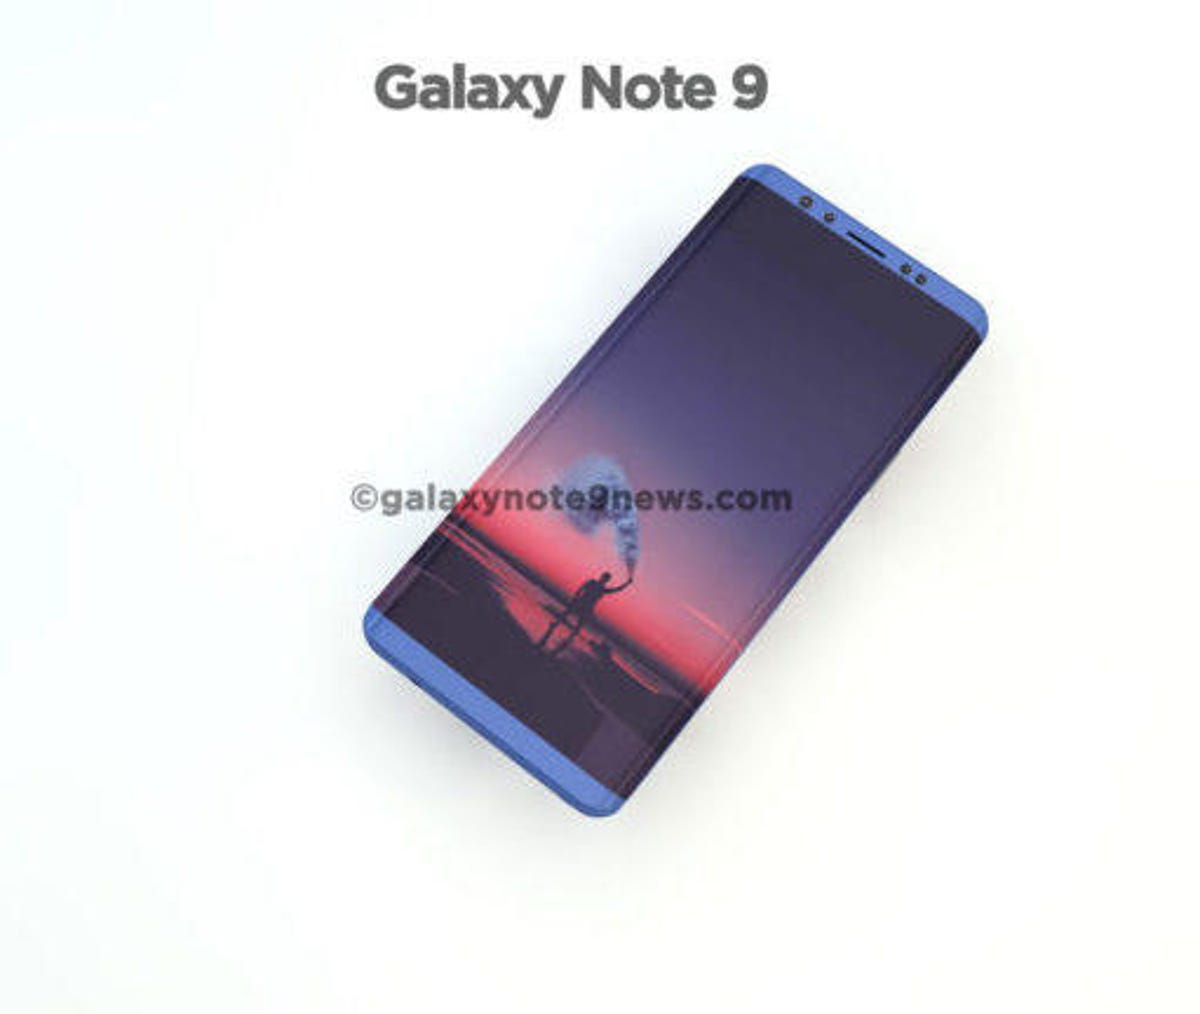 note-9-galaxy-note-9-news-render-3